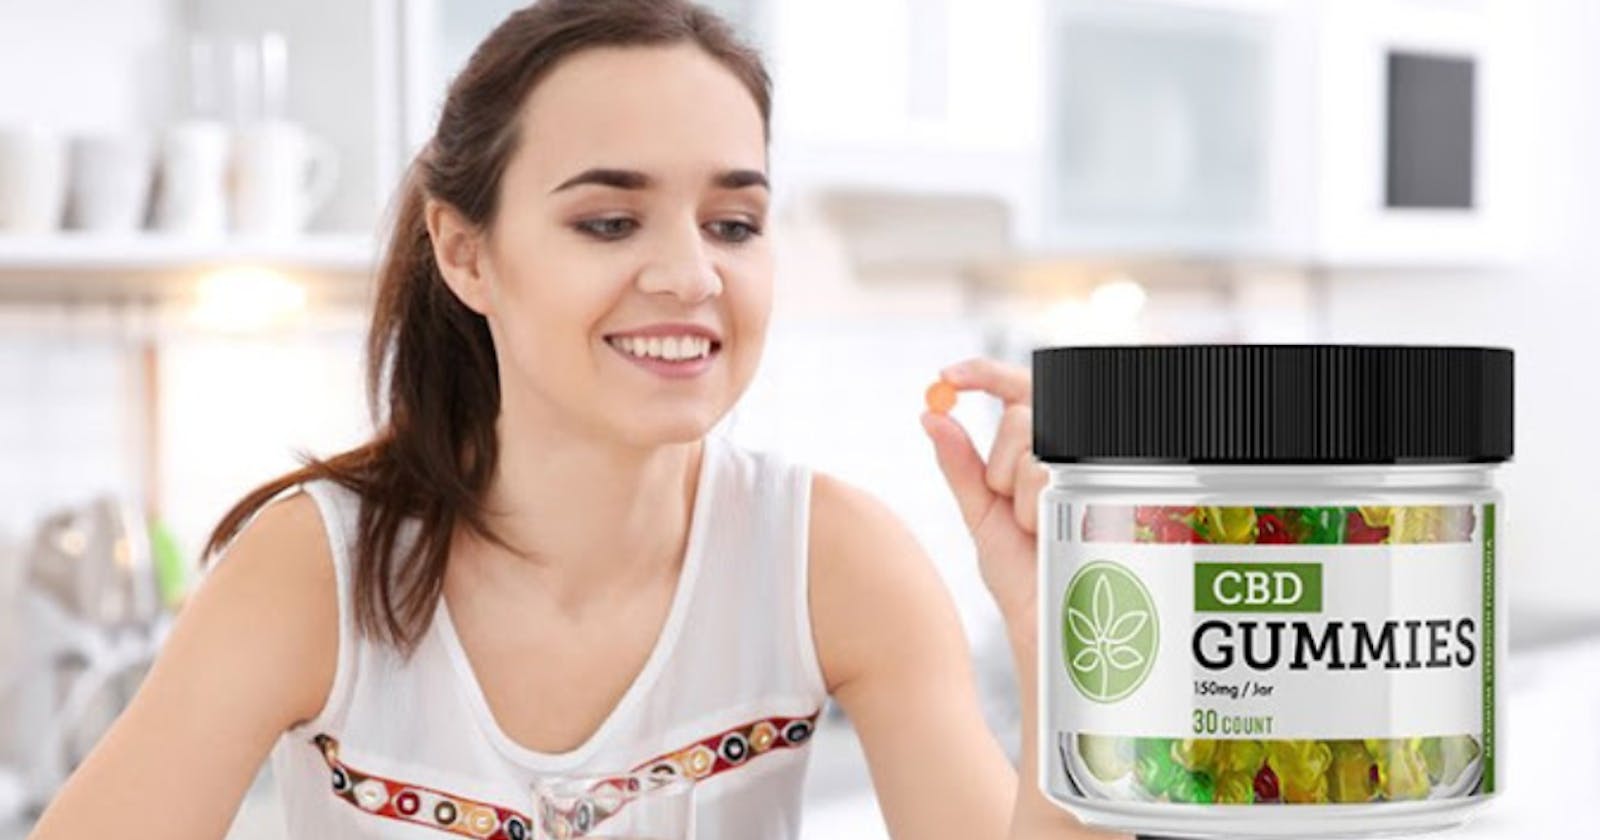 Carson Palmer CBD Gummies Reviews [SCAM OR LEGIT] Benefits Exposed Price Side Effects & Where to Buy?